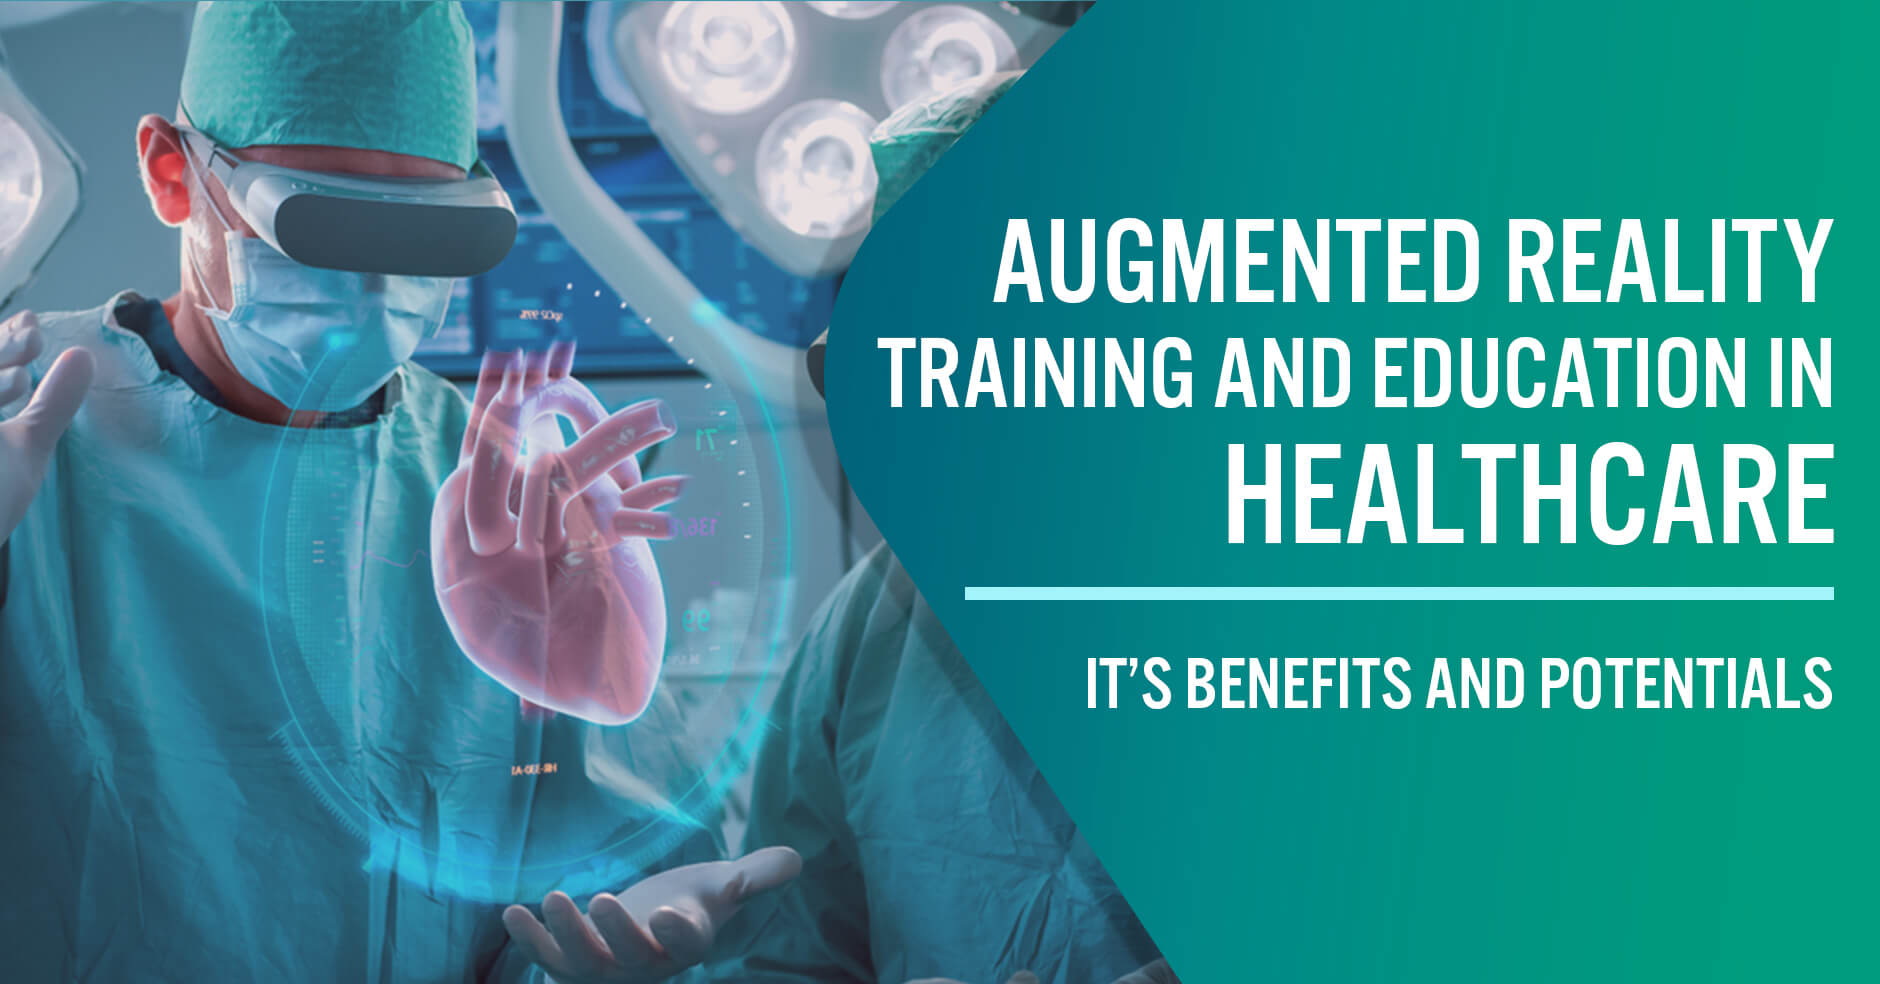 Augmented Reality Training and Education in Healthcare It’s Benefits and Potentials